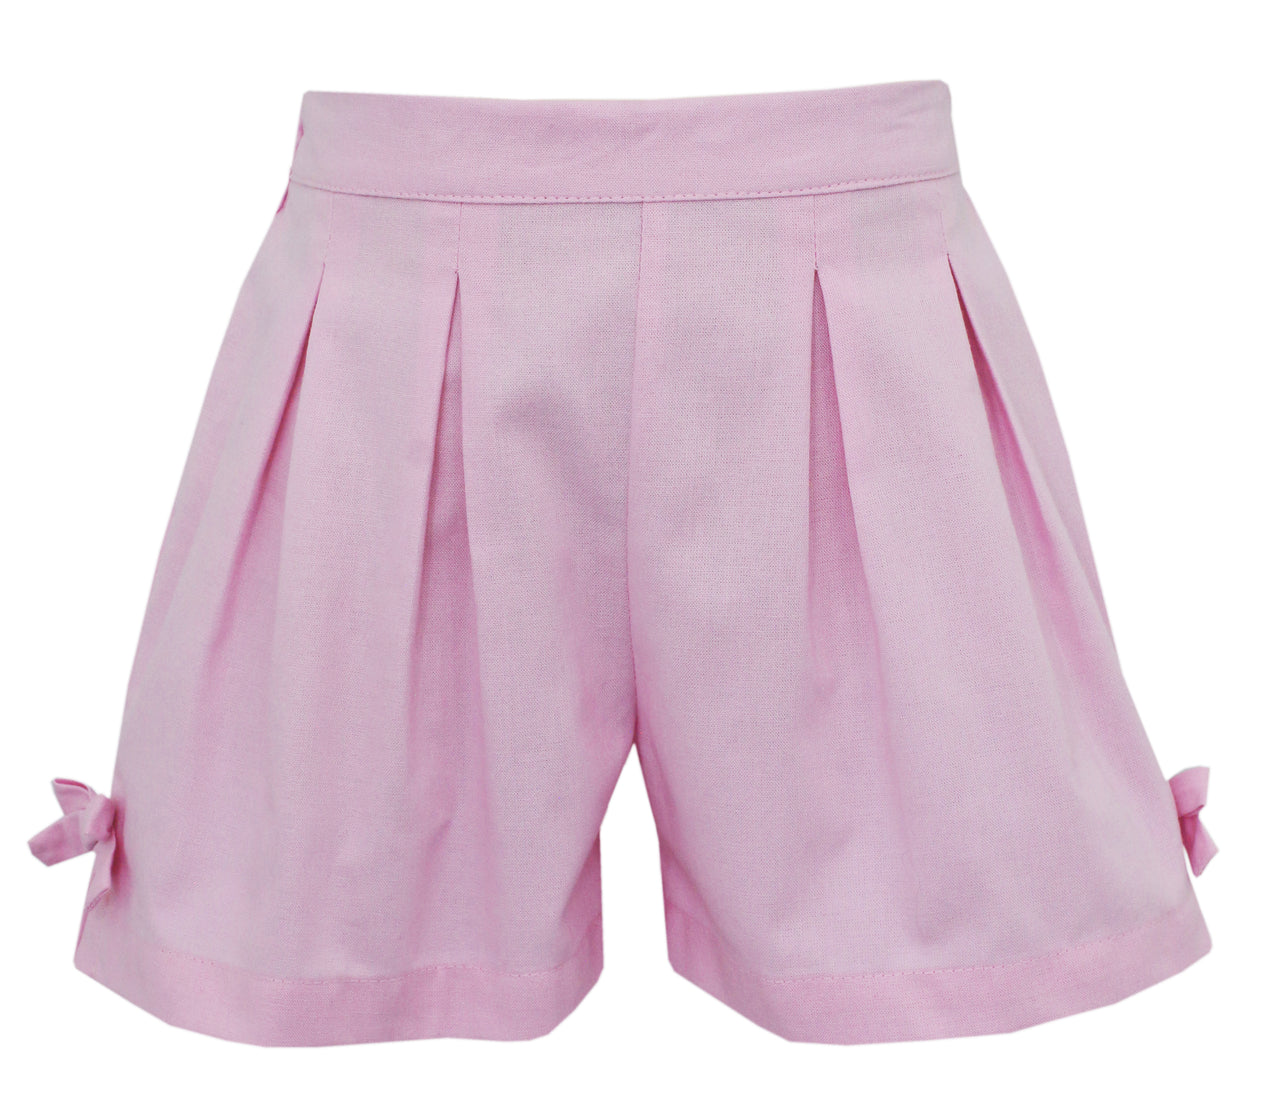 Claire & Charlie Birthday Girl's Shirt and Pink Shorts 5009SG/Q